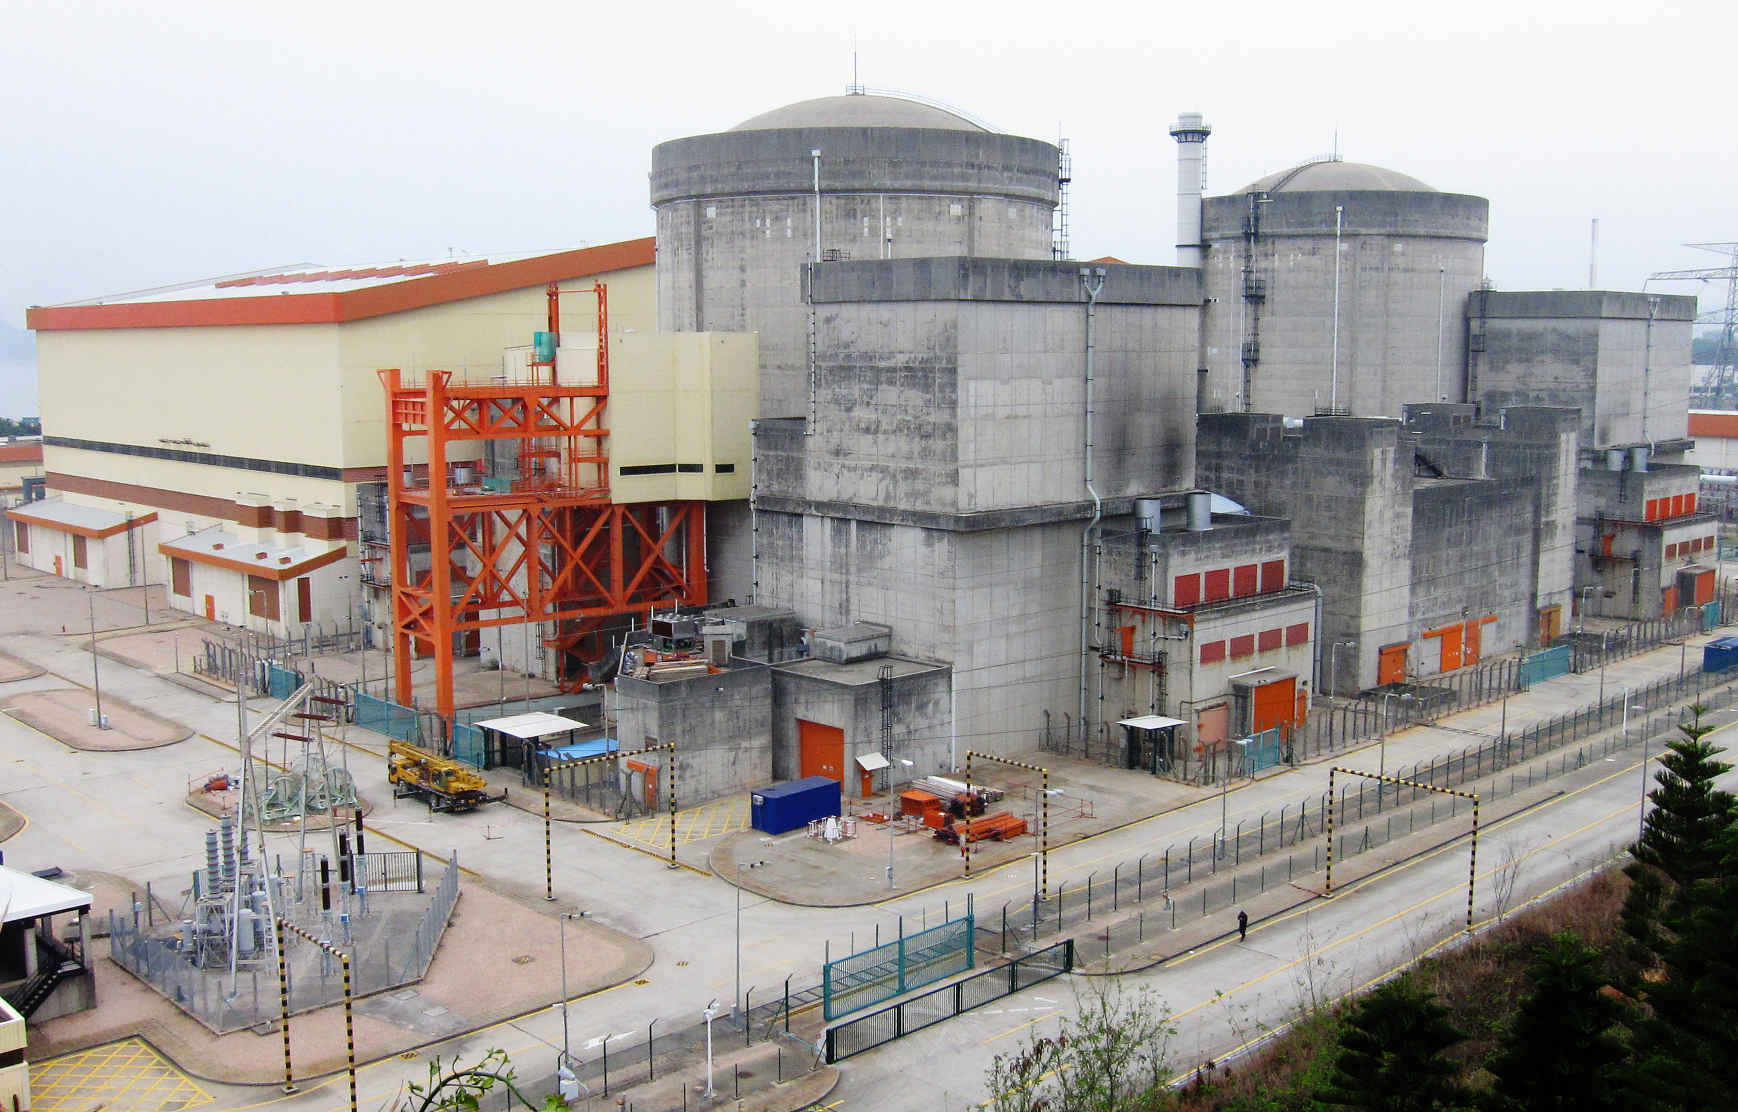 China is trying to secure sources of uranium as it builds more nuclear plants. Photo: Cheung Chi-fai